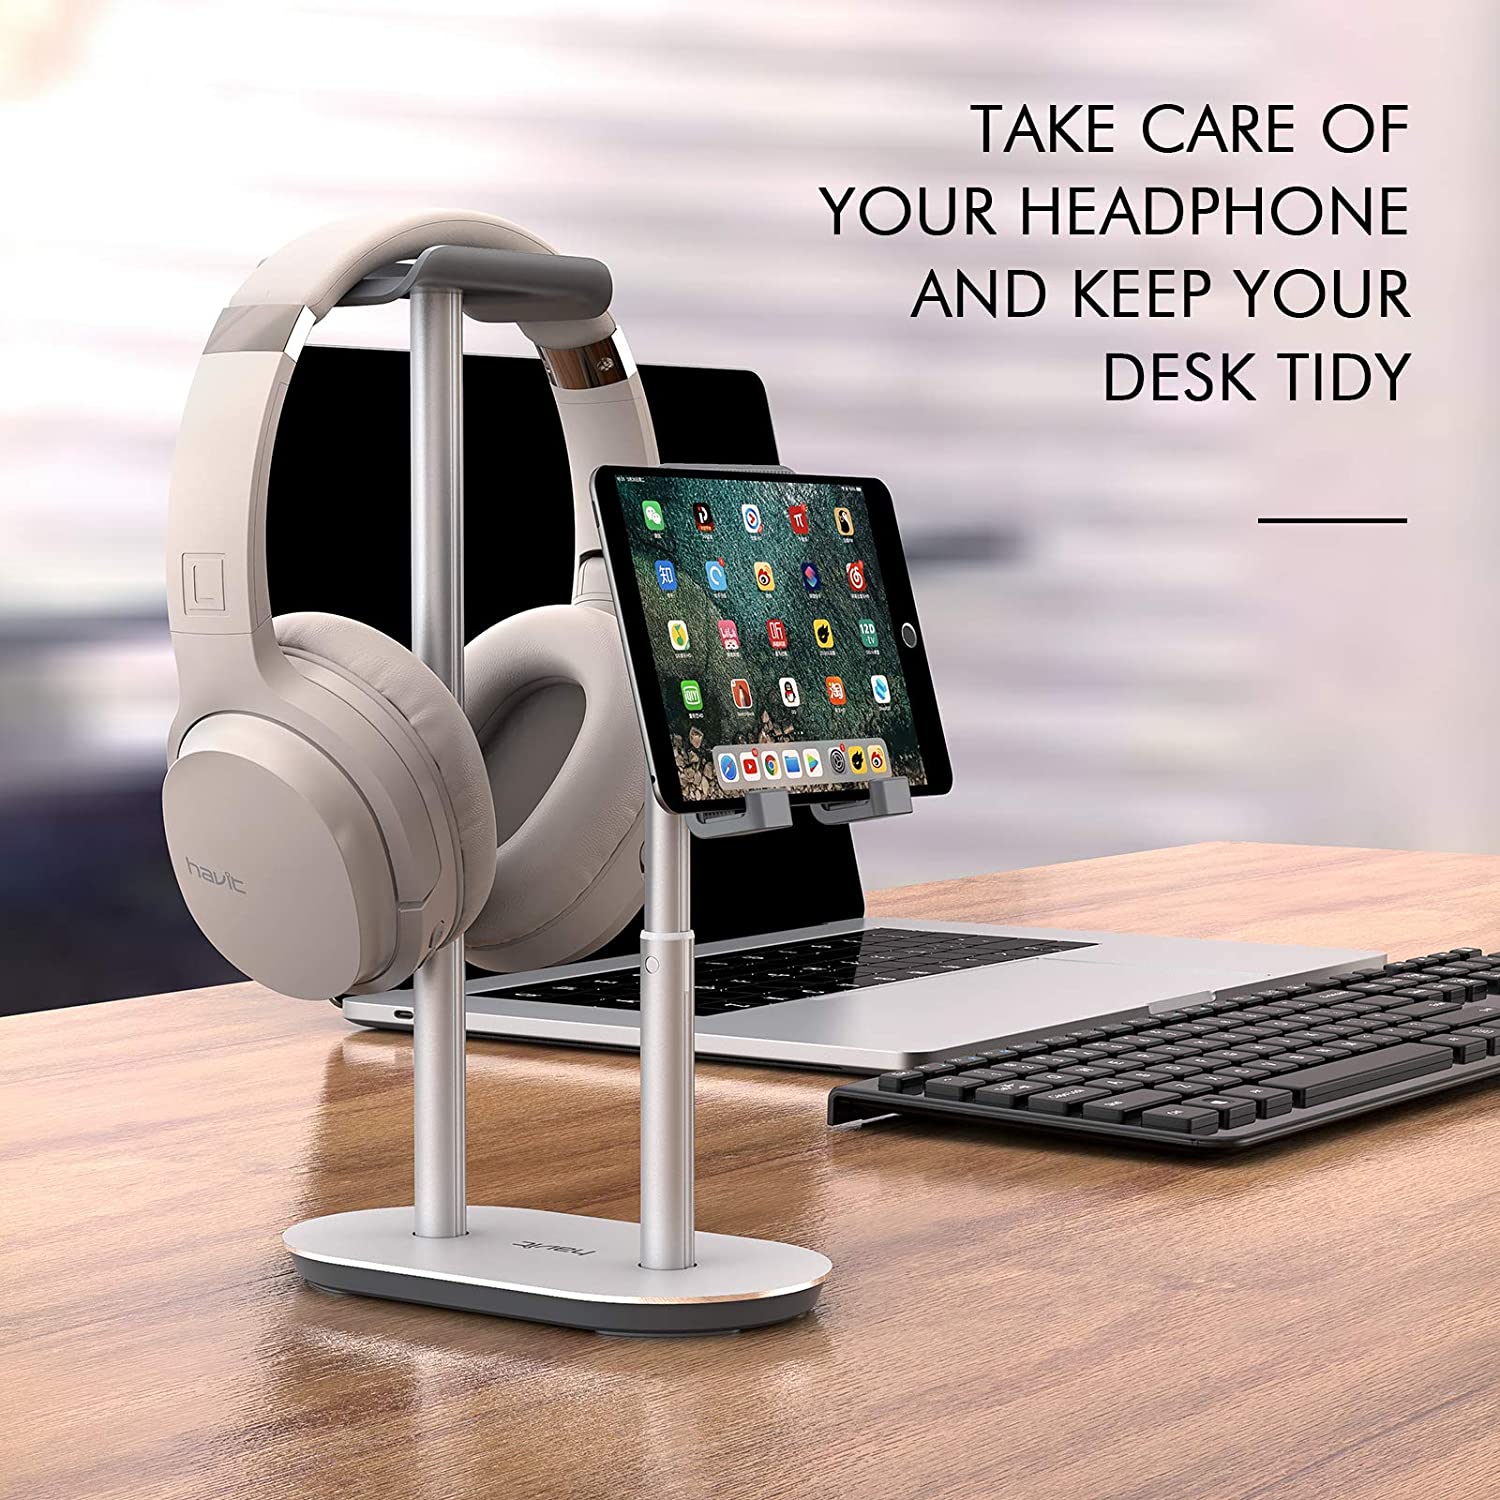 HAVIT TH660 Headset and Phone Stand for Phones Tablets PC Gamer Desktop